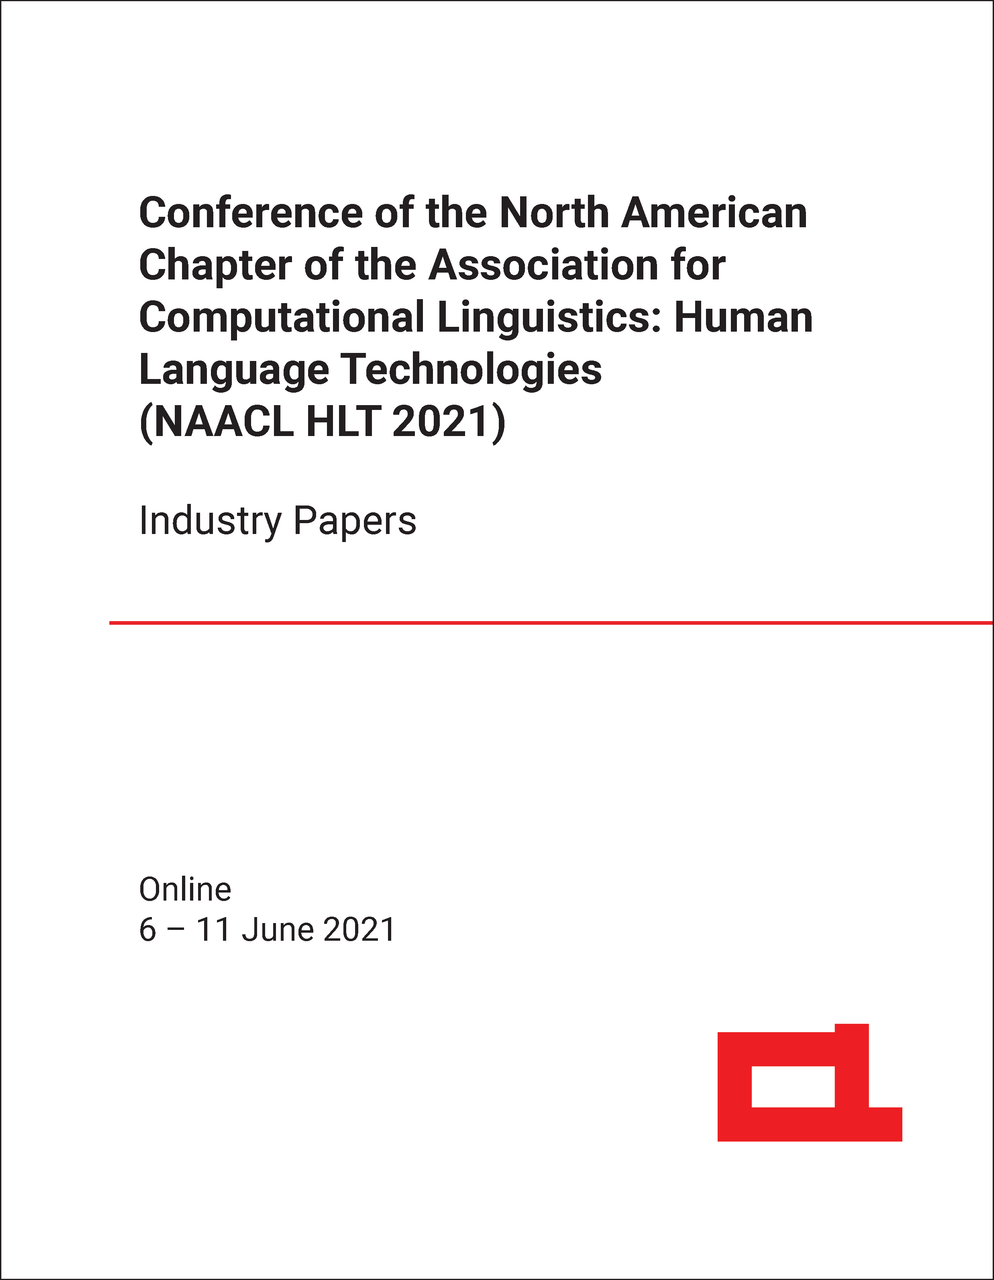 HUMAN LANGUAGE TECHNOLOGIES. CONFERENCE OF NORTH AMERICAN CHAPTER OF